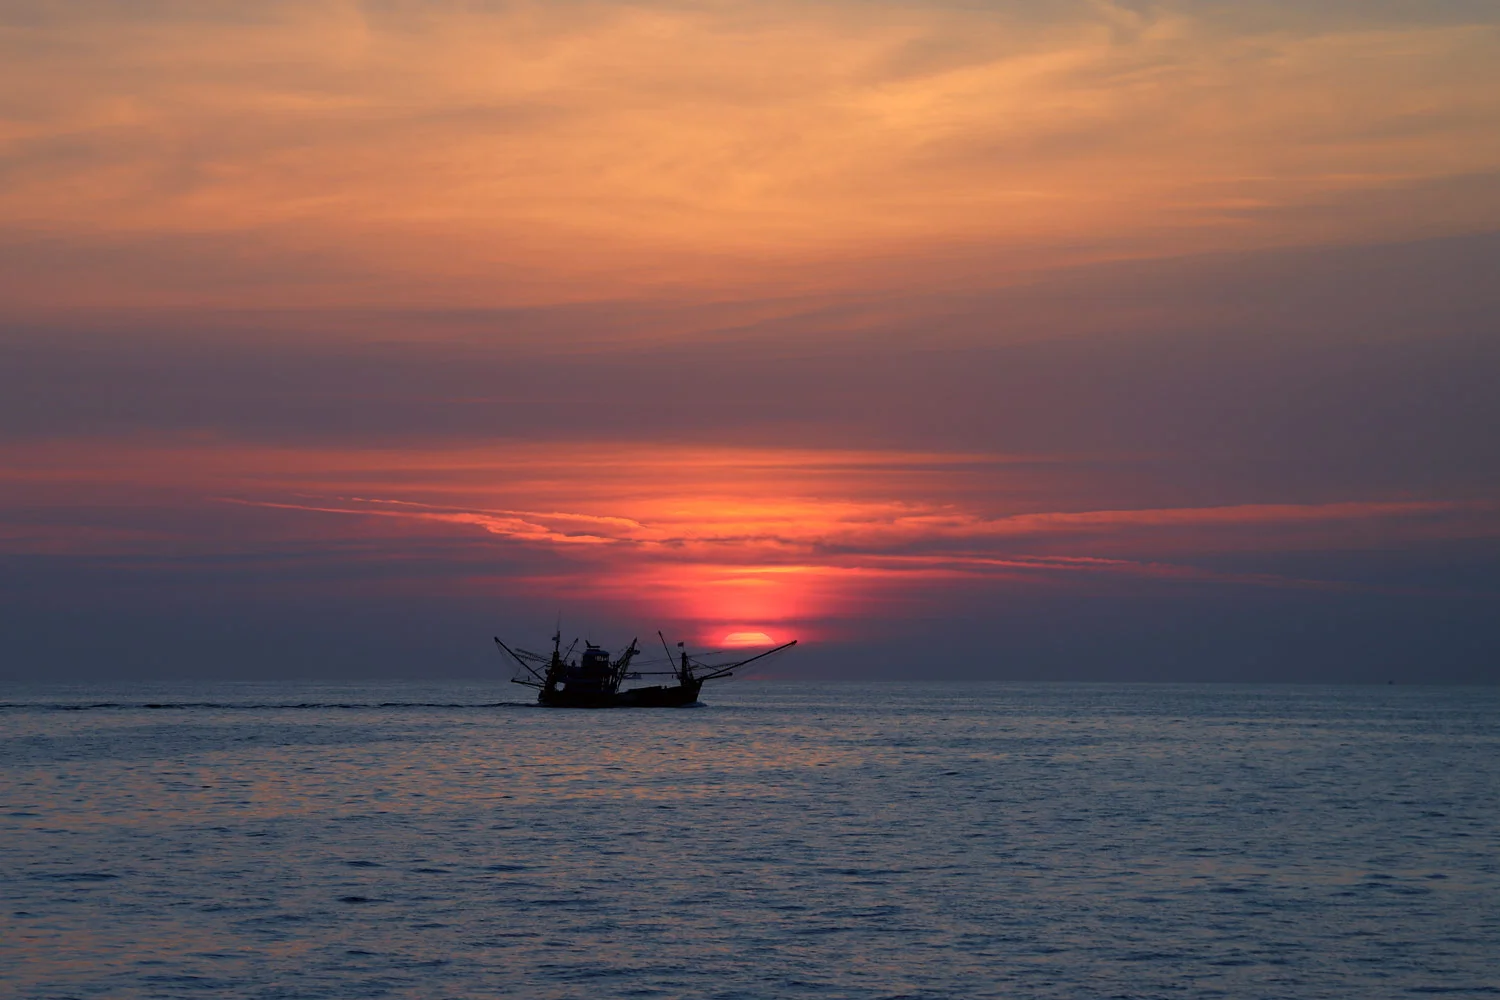 The sun sets on the ocean horizon next to a shrimper vessel rigged to start fishing off the coast of Thailand.